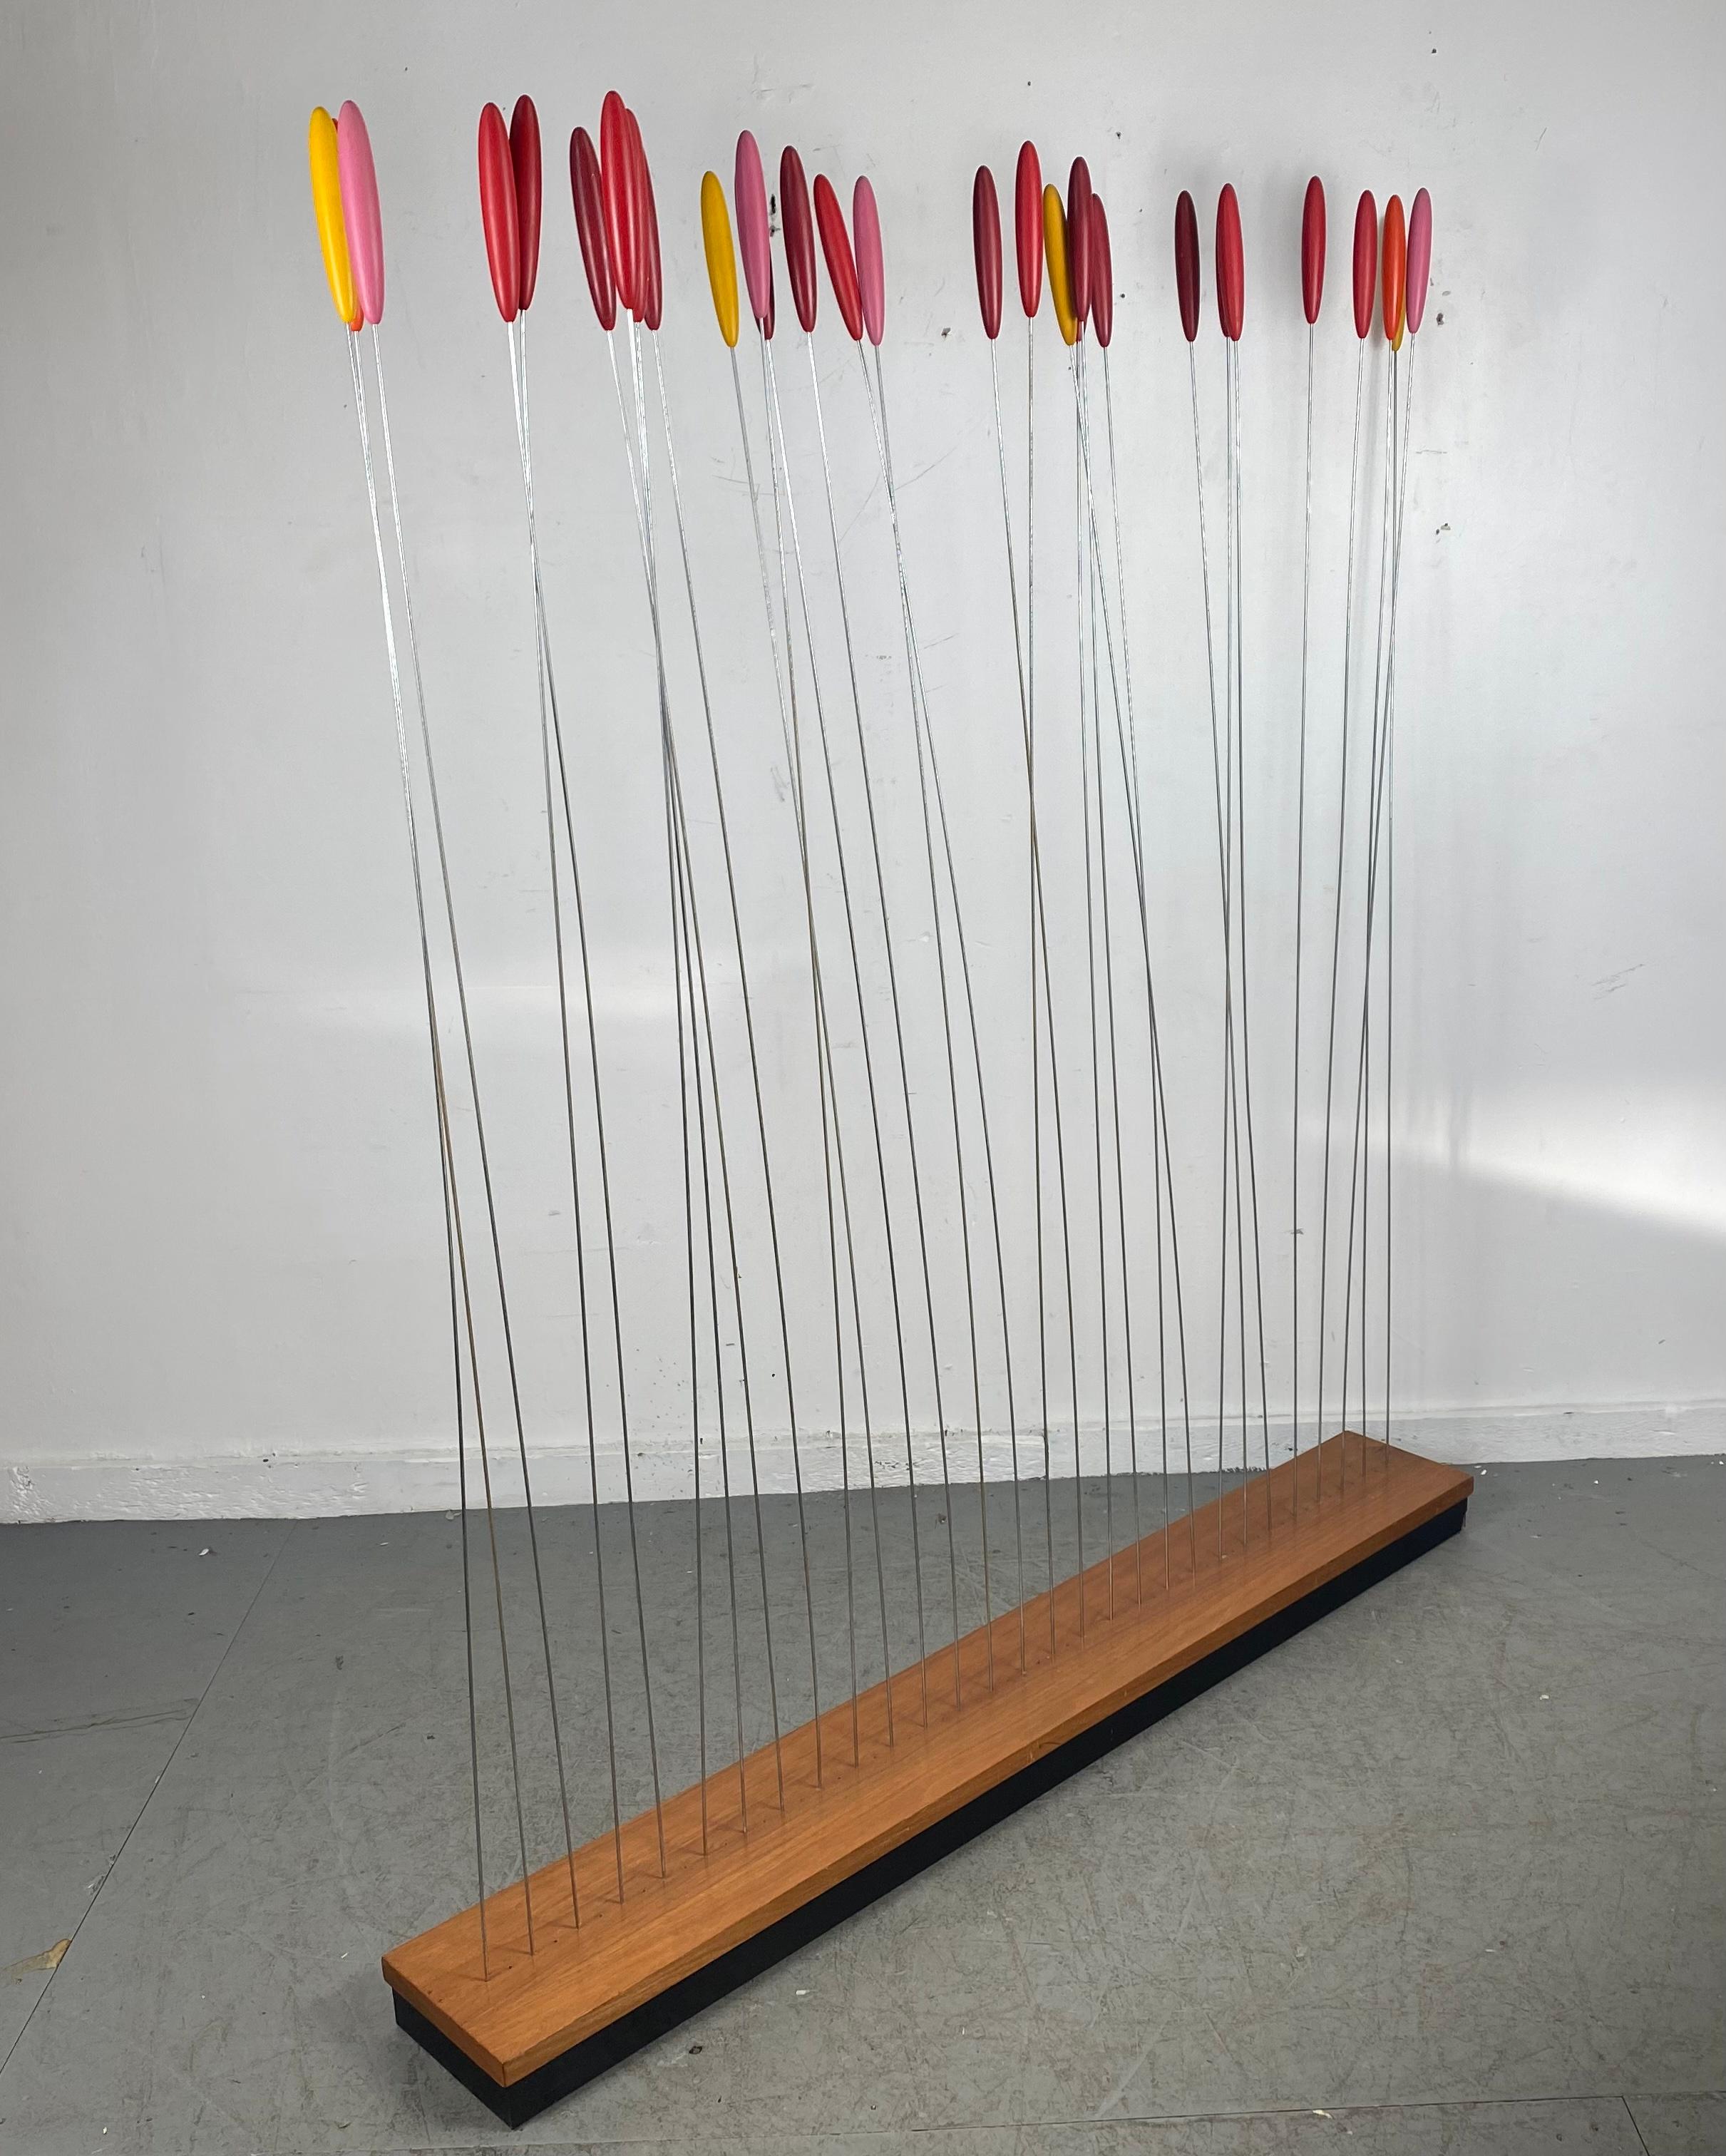 Extremely rare Cattail Sculpture / Room divider designed by Bill Curry for Design Line,,Featuring 29 metal rods with beautifully shaped and painted oval tops..Amazing colors ,, shades of reds,,pinks and gold,,Nice original condition, minor residue